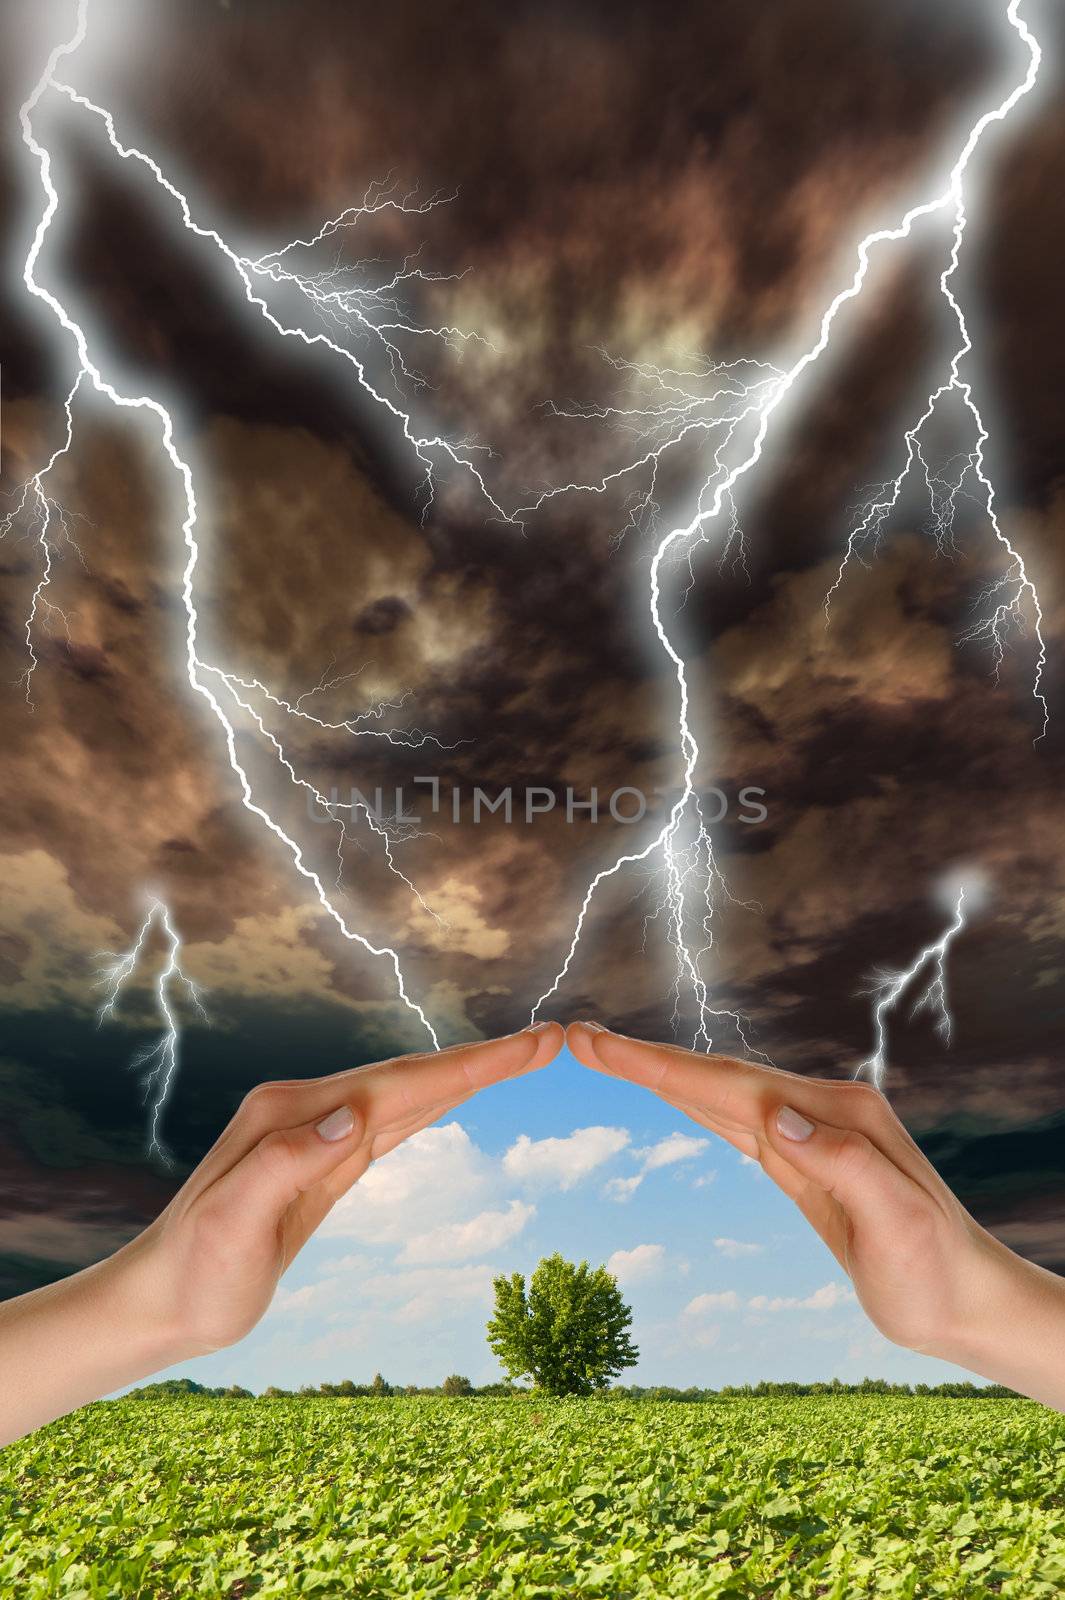 Two hands preserve a green tree against a thunder-storm by galdzer